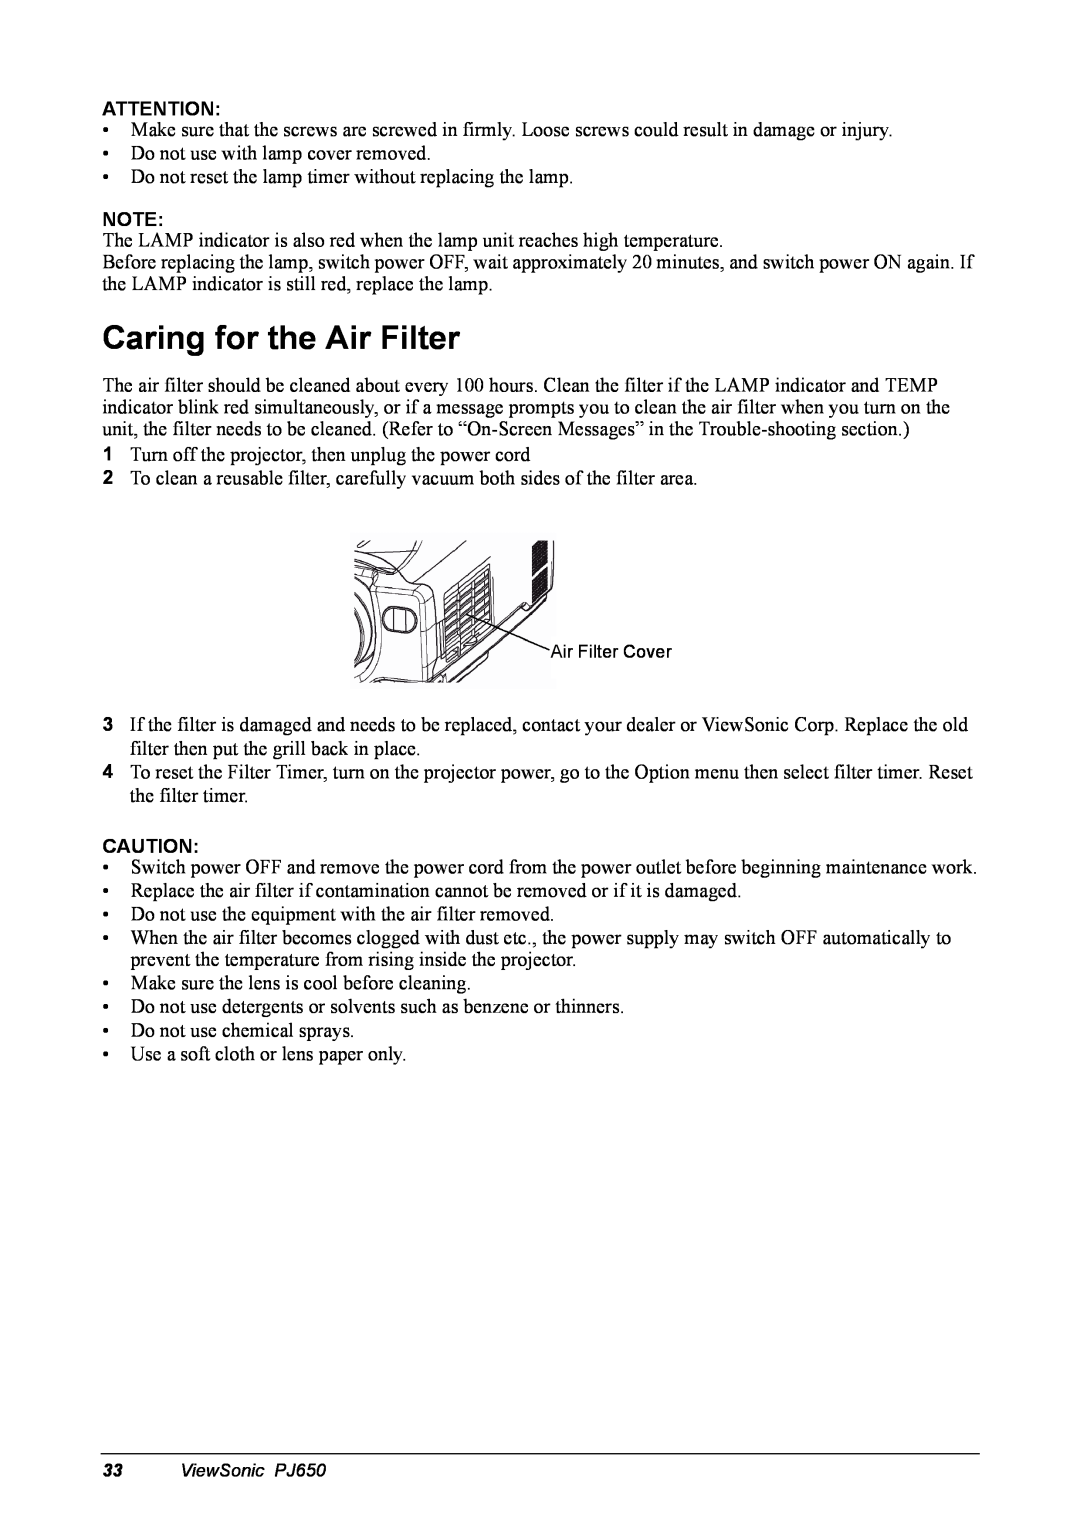 ViewSonic PJ650 manual Caring for the Air Filter 